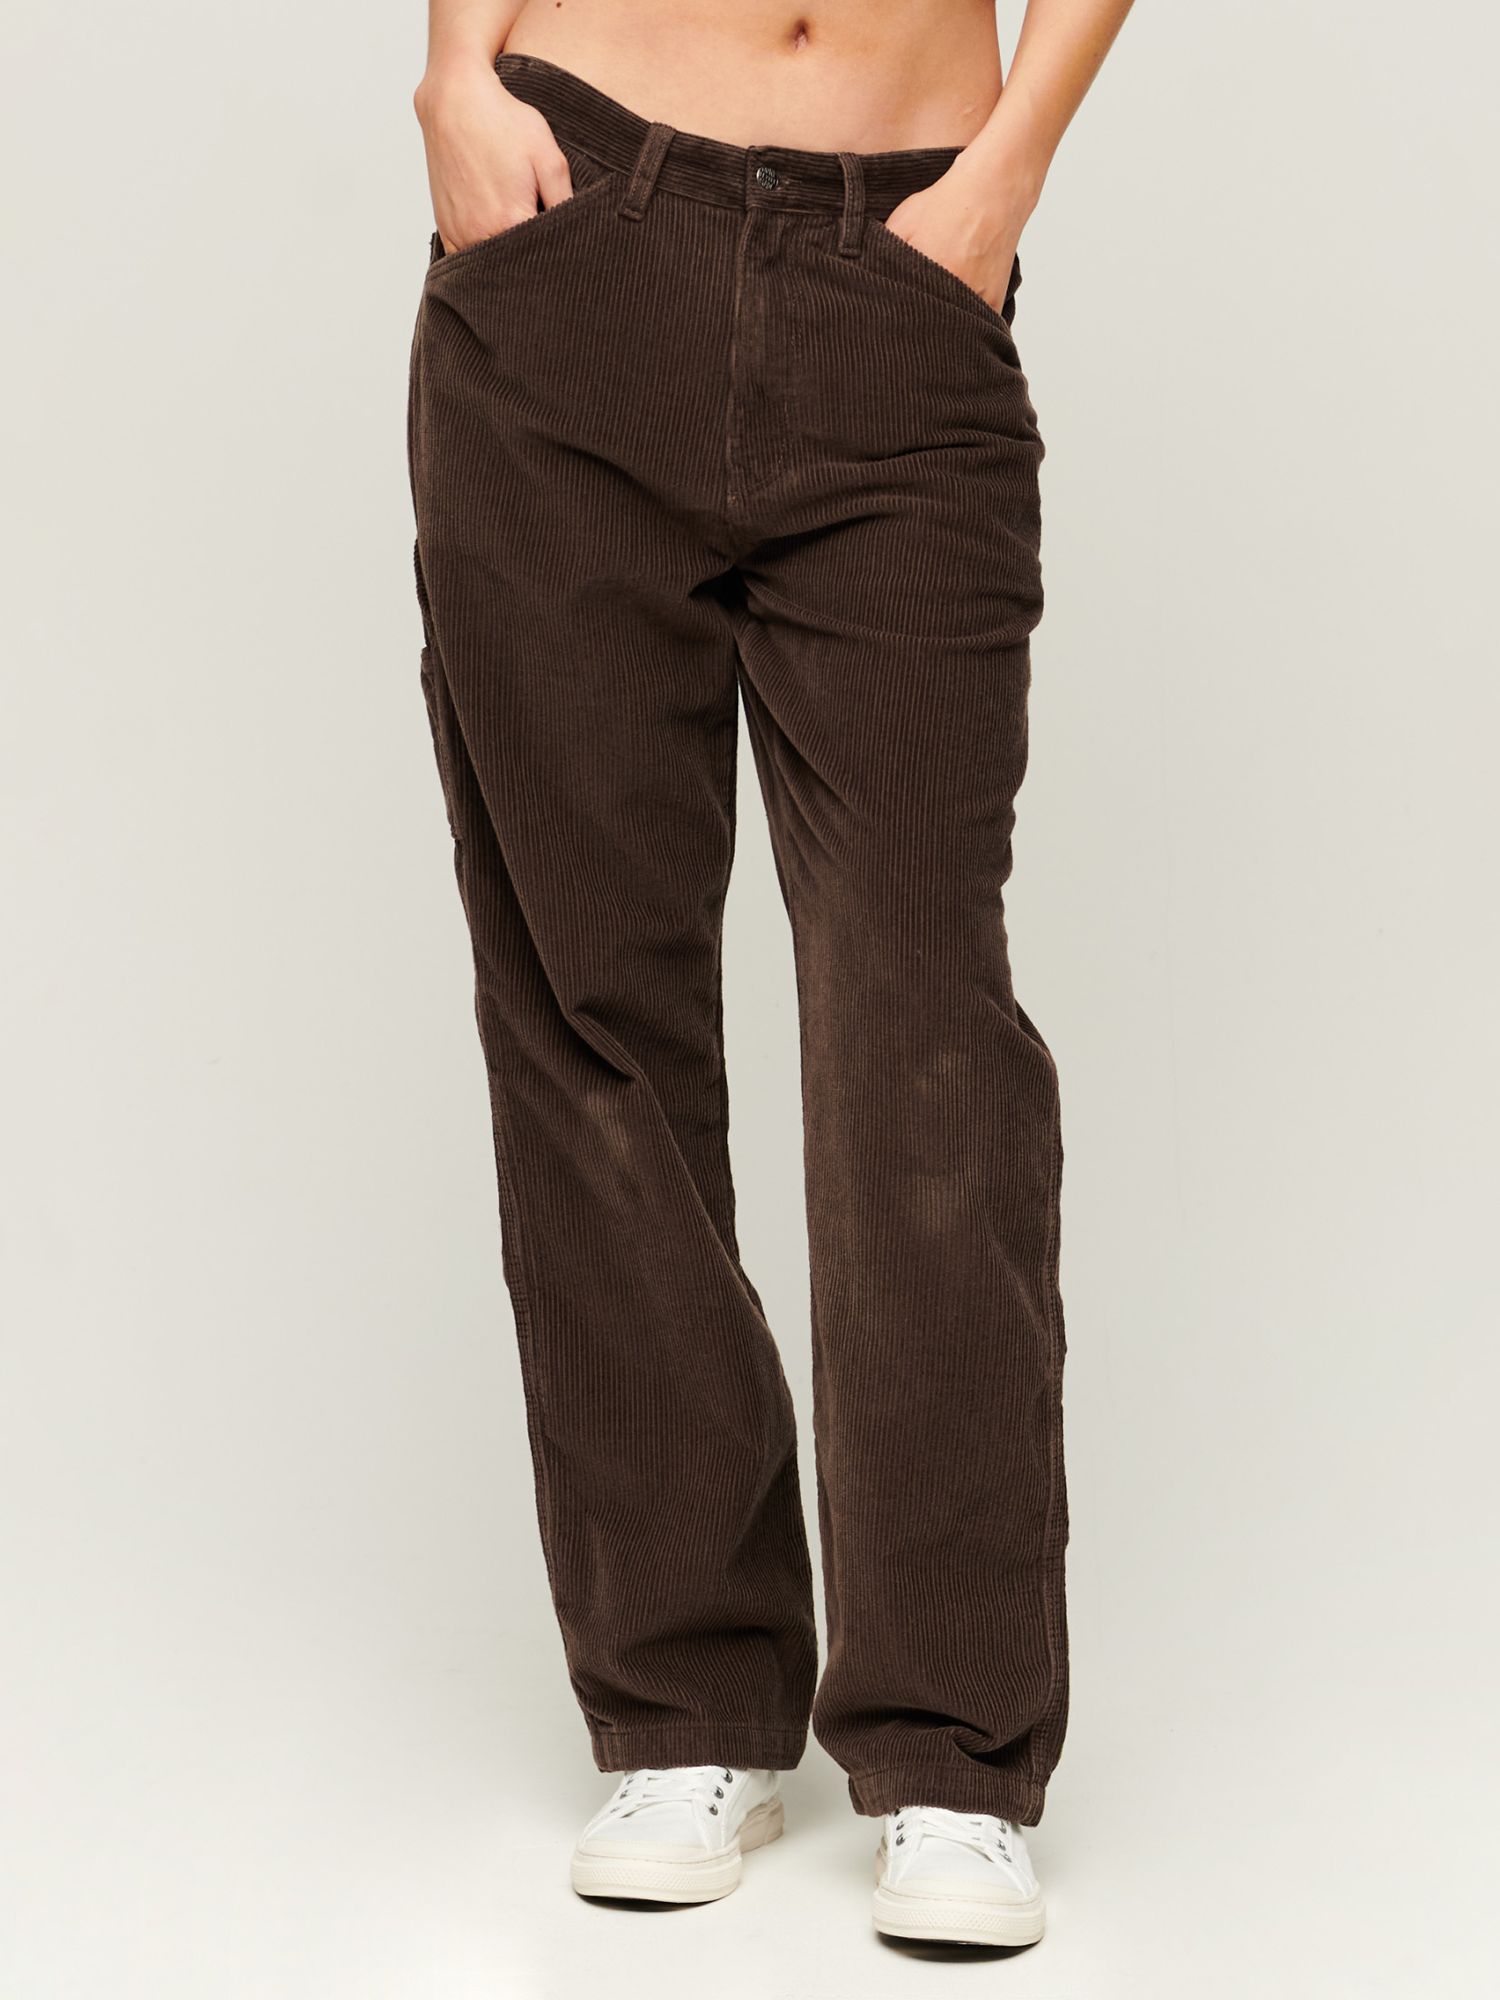 Superdry Cord Carpenter Trousers, Chocolate Brown at John Lewis & Partners